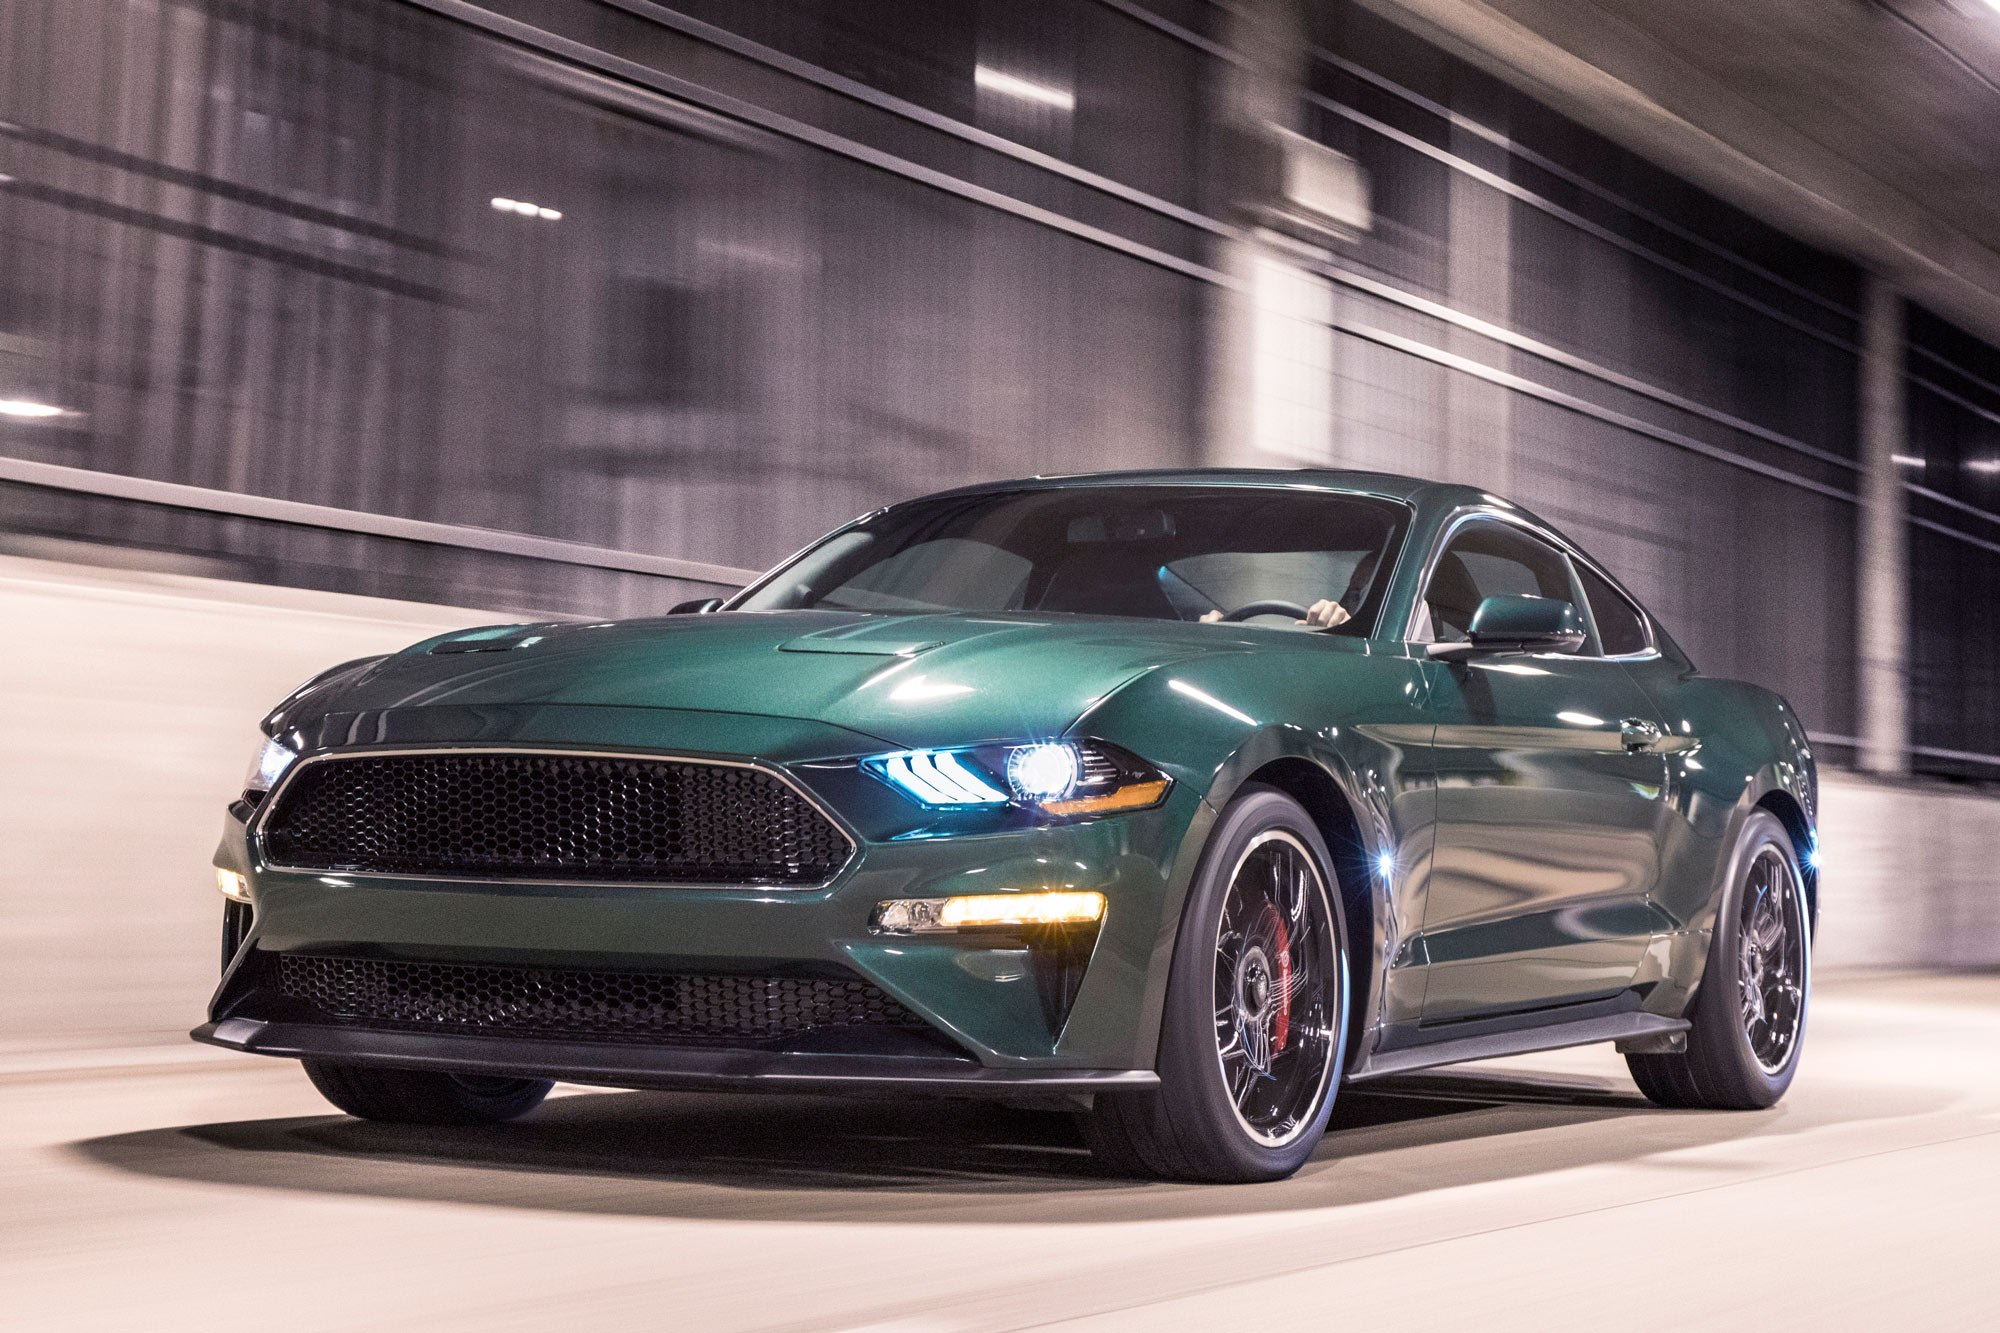 A green 2020 Ford Mustang tribute model of the car from Bullitt